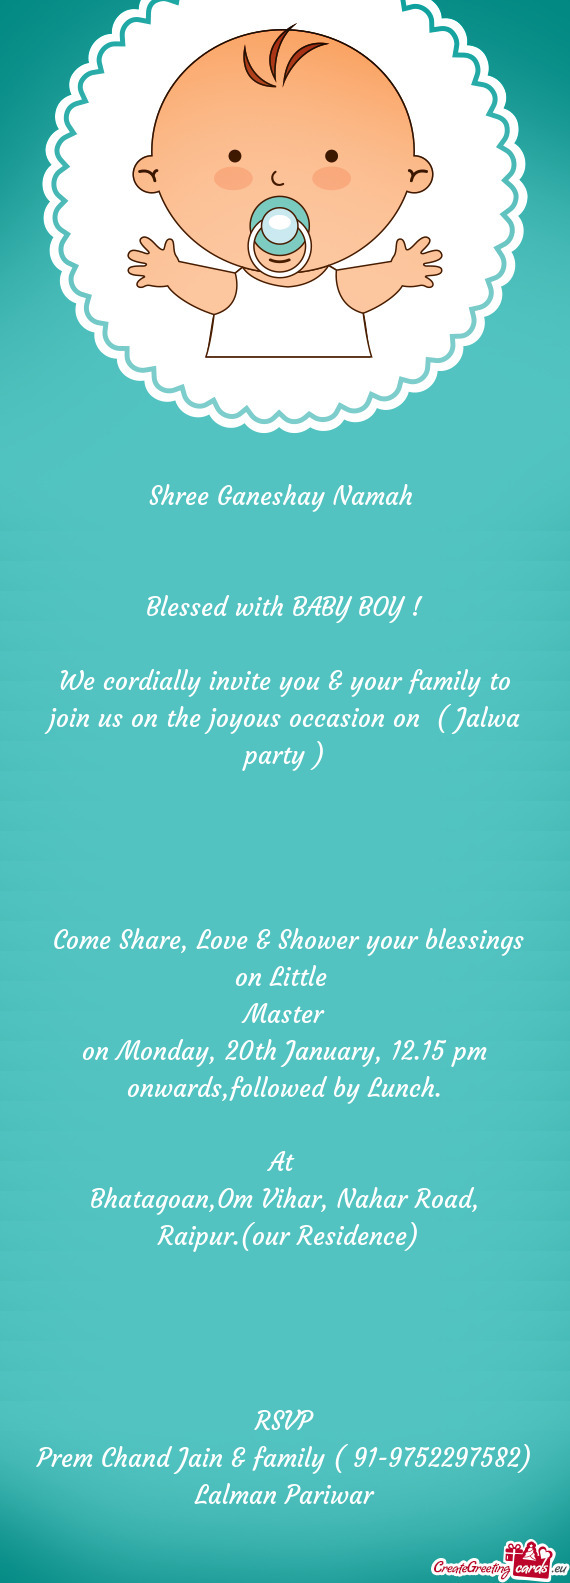 We cordially invite you & your family to join us on the joyous occasion on ( Jalwa party )